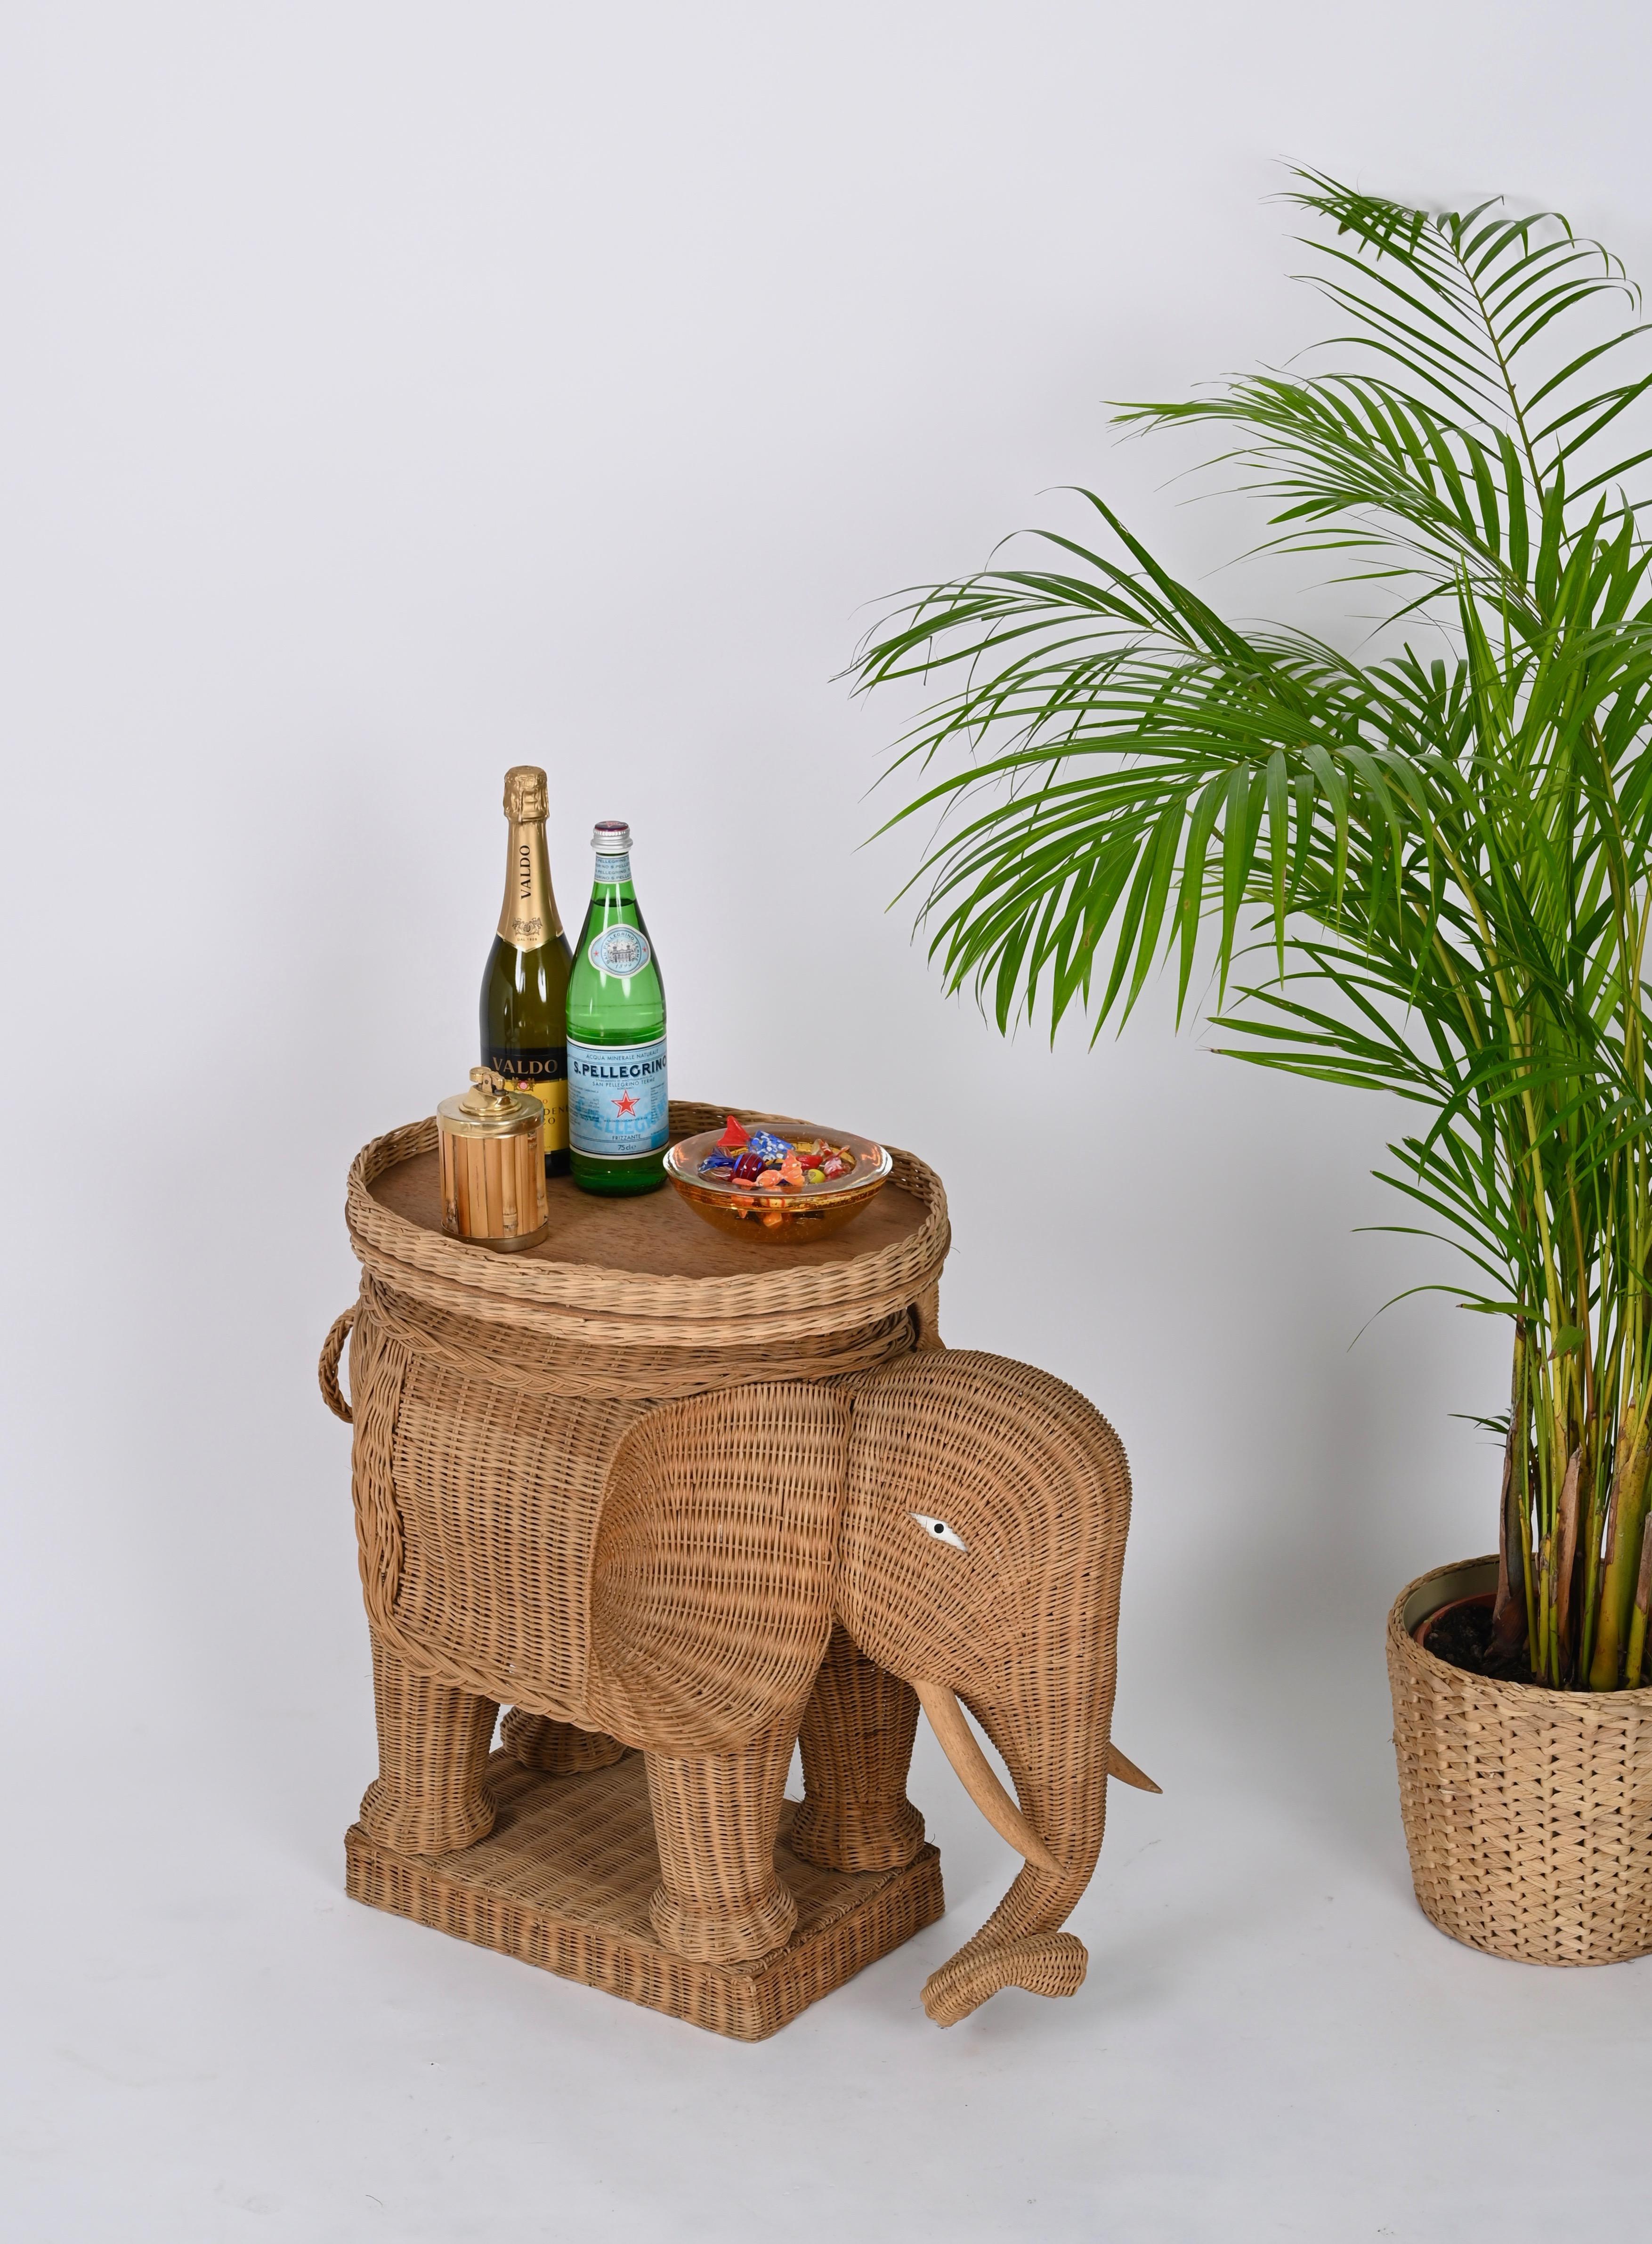 Stunning midcentury large elephant-shaped side table fully made in hand-woven wicker. This gorgeous object was designed by Vivai del Sud in Italy during the 1970s. 

This lovely side or cocktail table is fully hand-made with mind-blowing details and